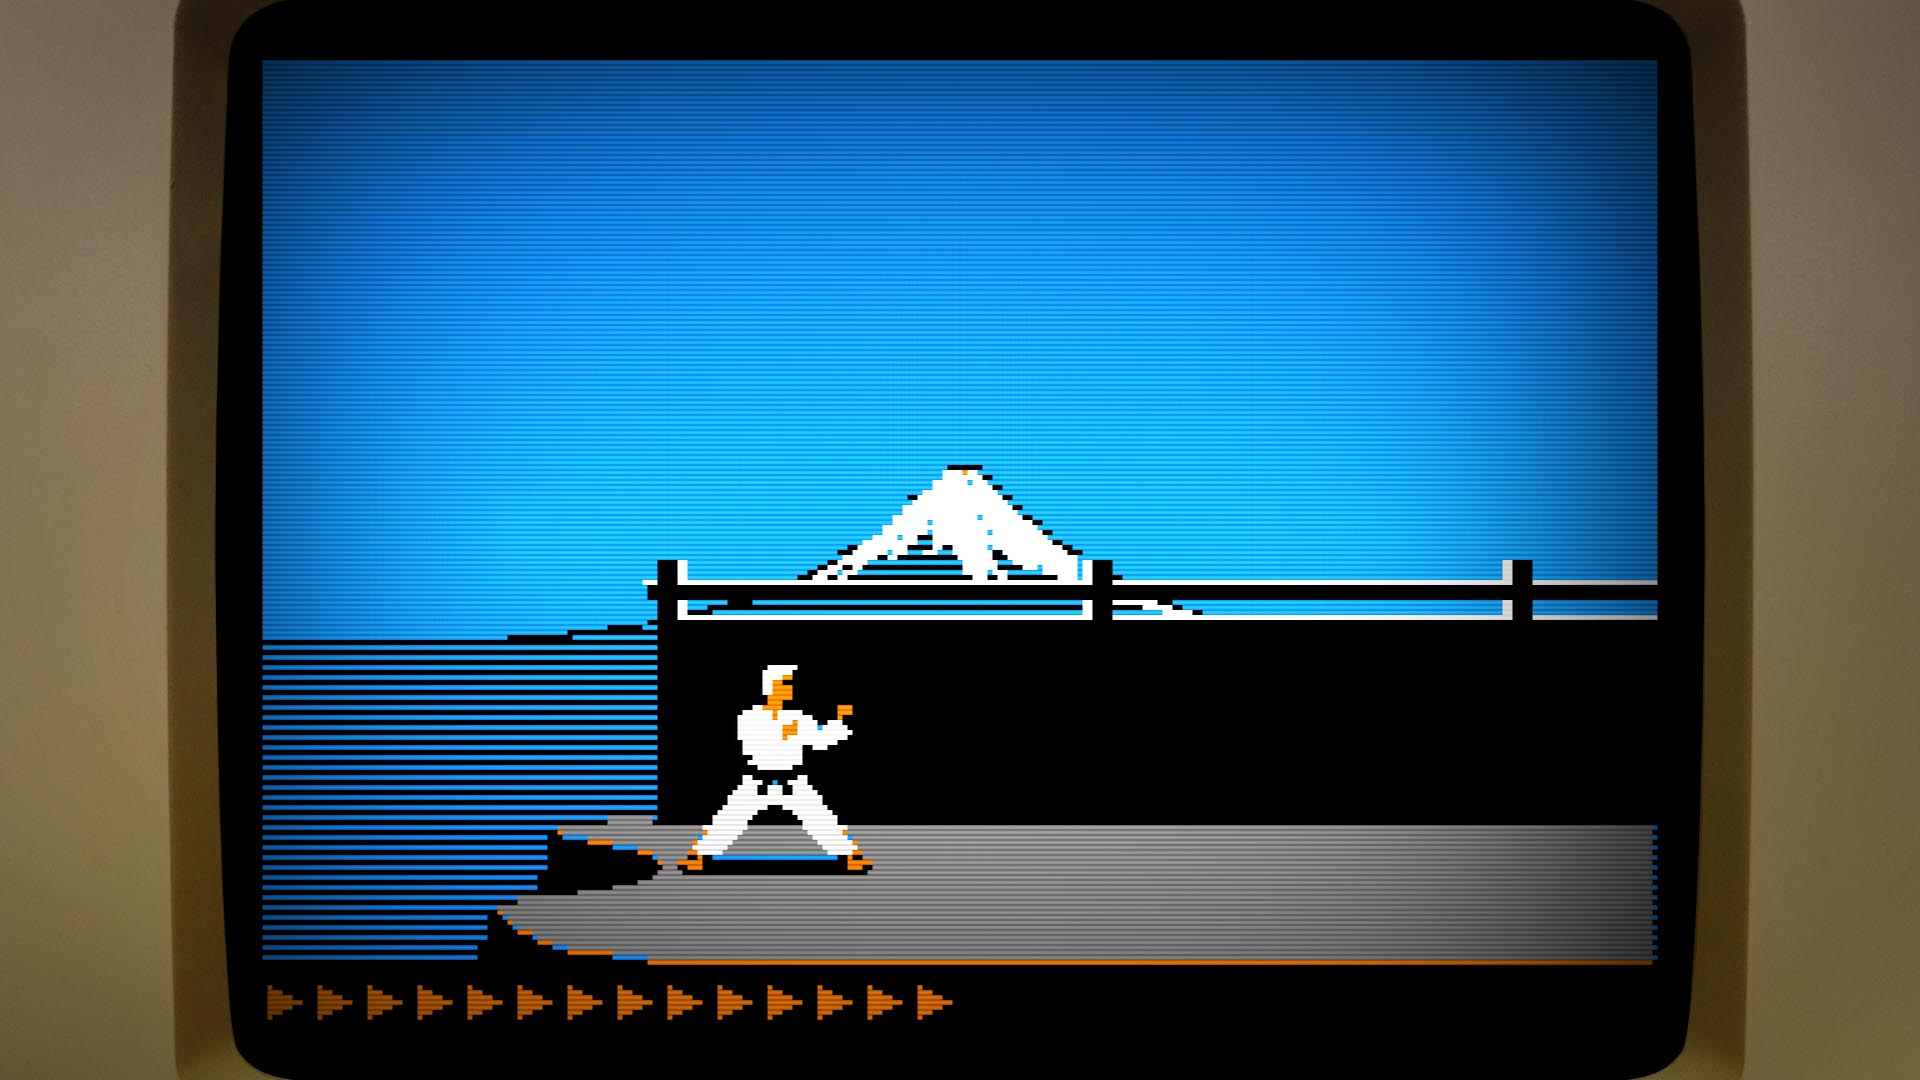 Historical past You Can Play: The Making of Karateka Is the First in a Collection of Interactive Documentaries